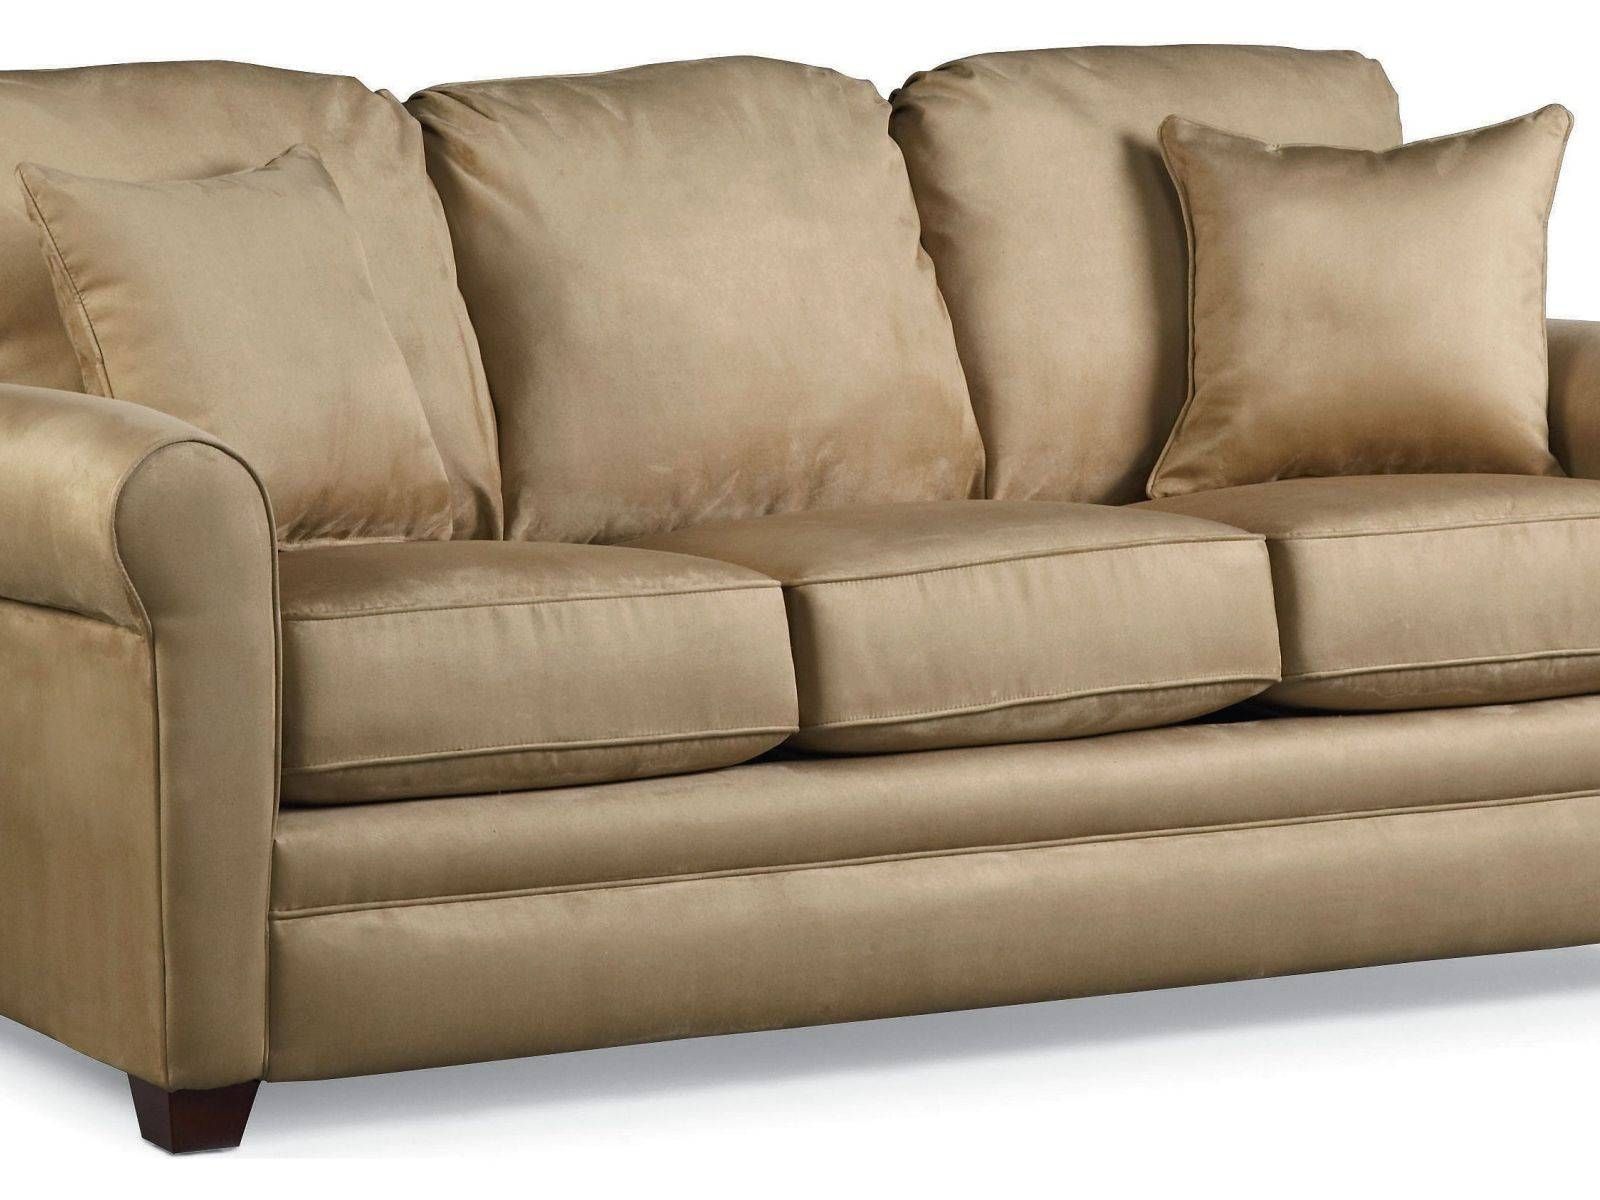 ☆▻ Sofa : 4 Fabulous Sofa Sleepers Queen Alluring Home Decor In Sofa Sleepers Queen Size (View 11 of 30)